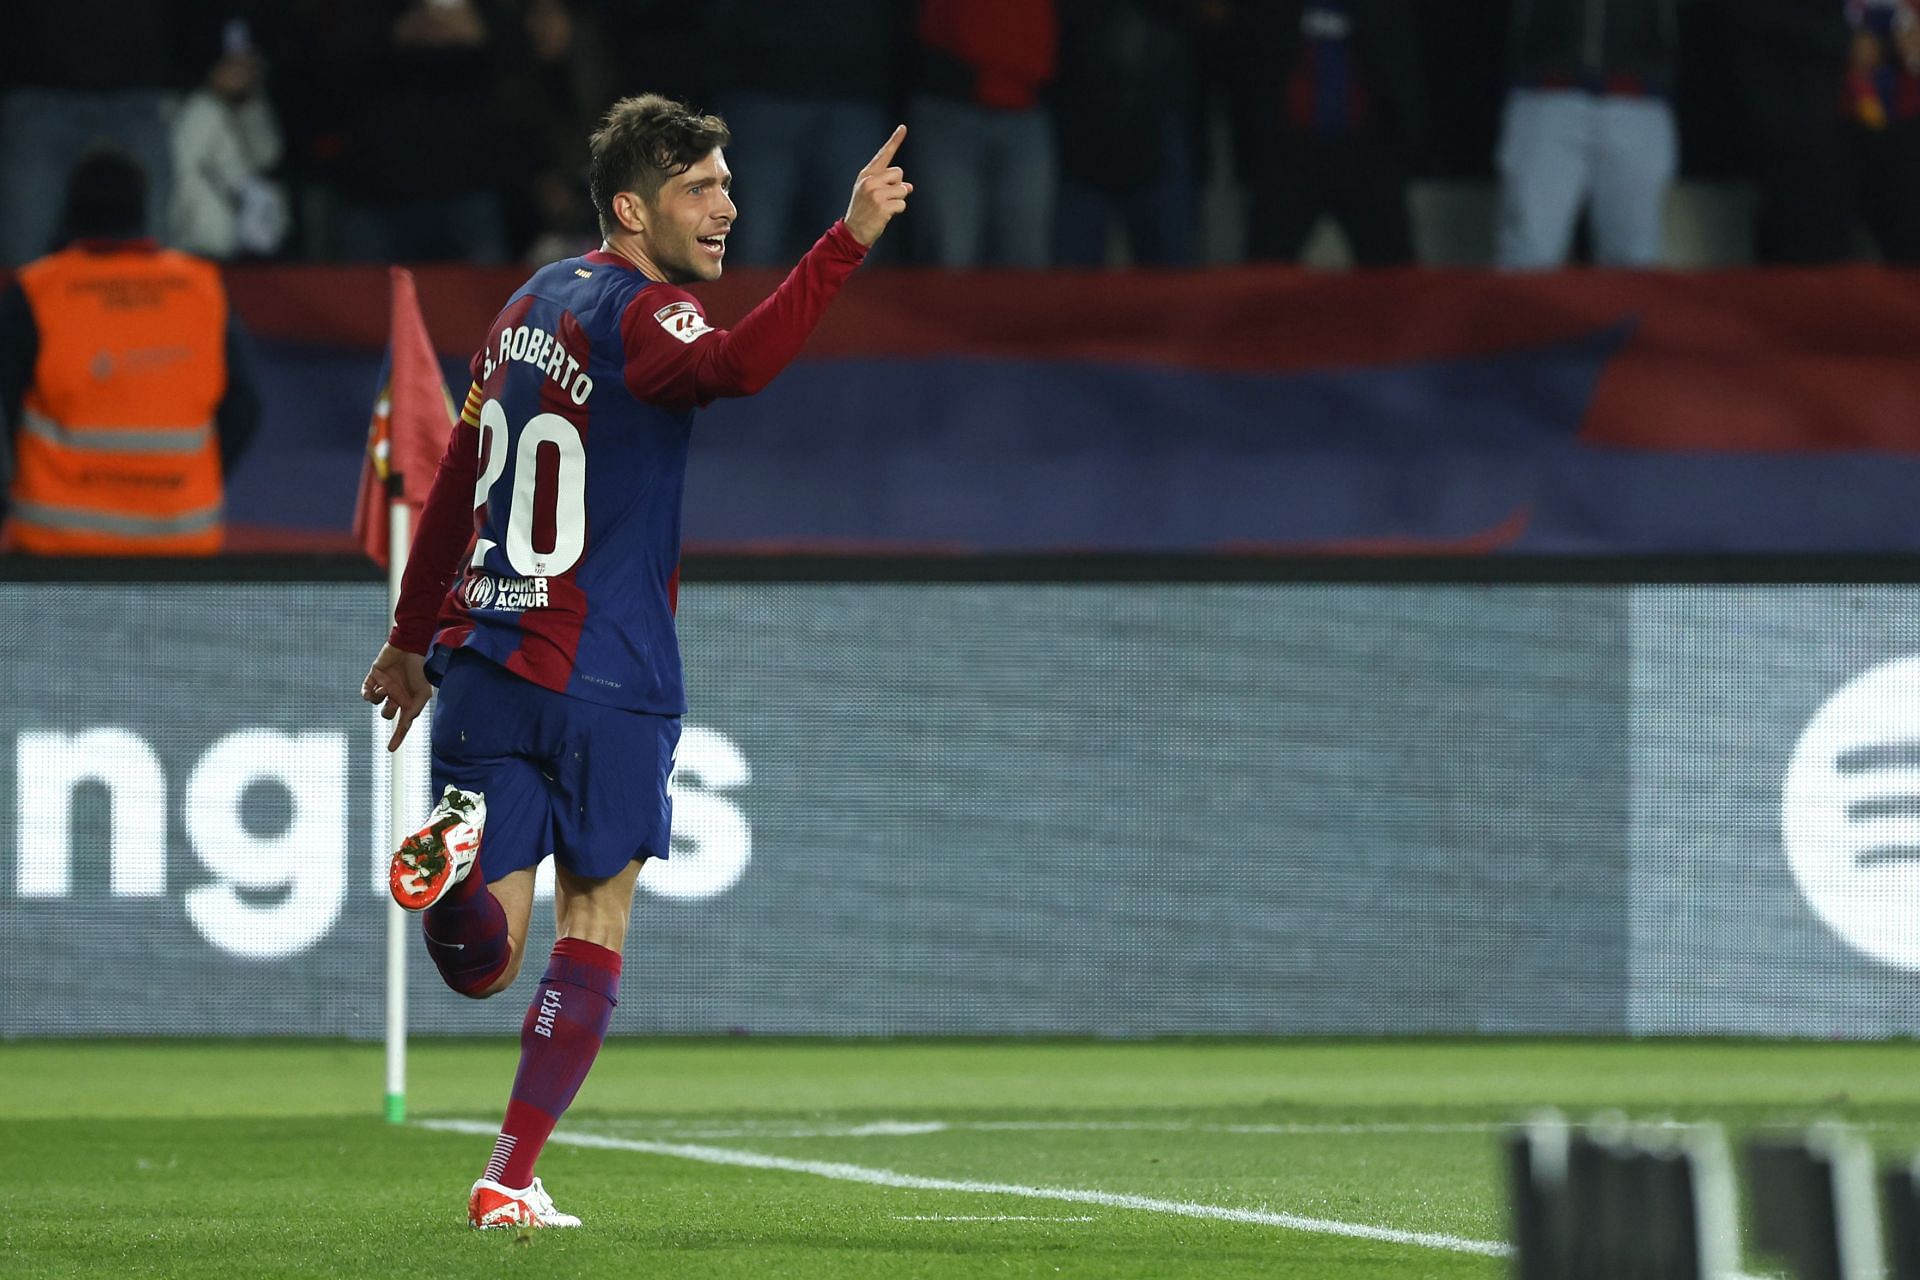 Sergi Roberto is the club captain at the Camp Nou.